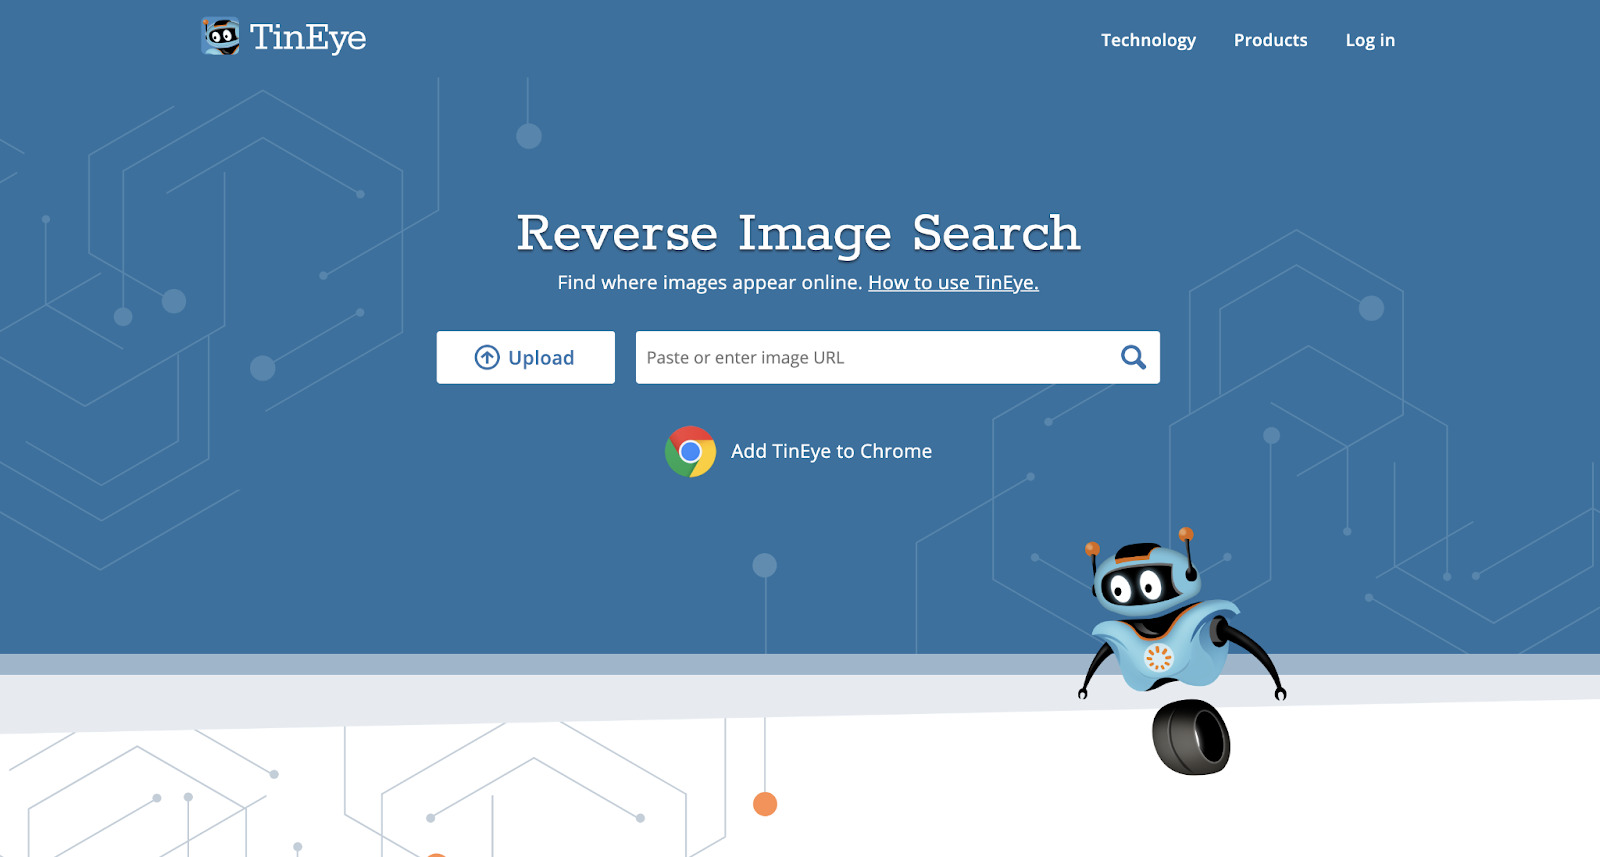 TinEye is a popular image search engine.